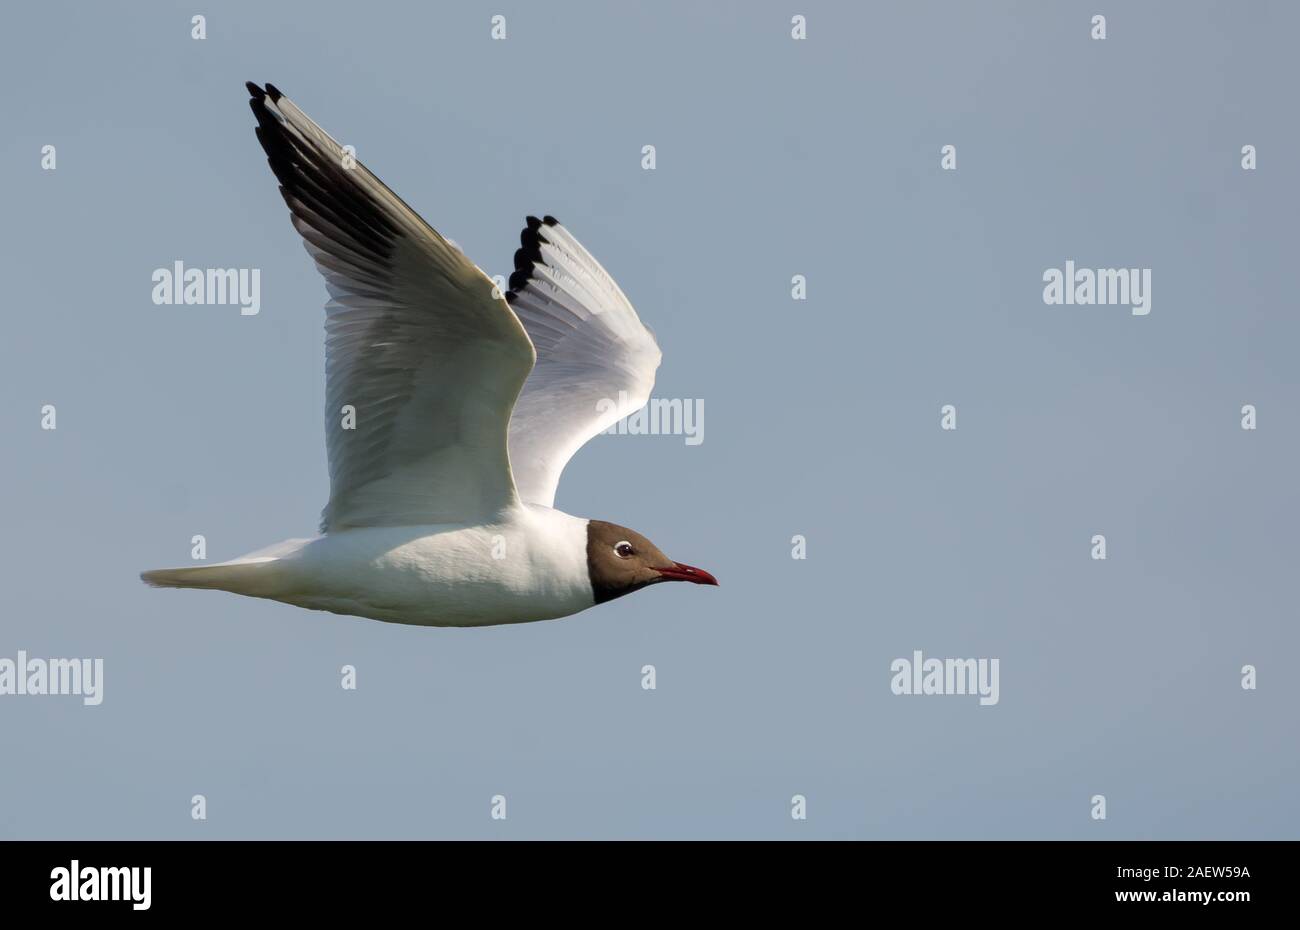 Black-headed gull flying straight over cloudy sky with lifted wings Stock Photo